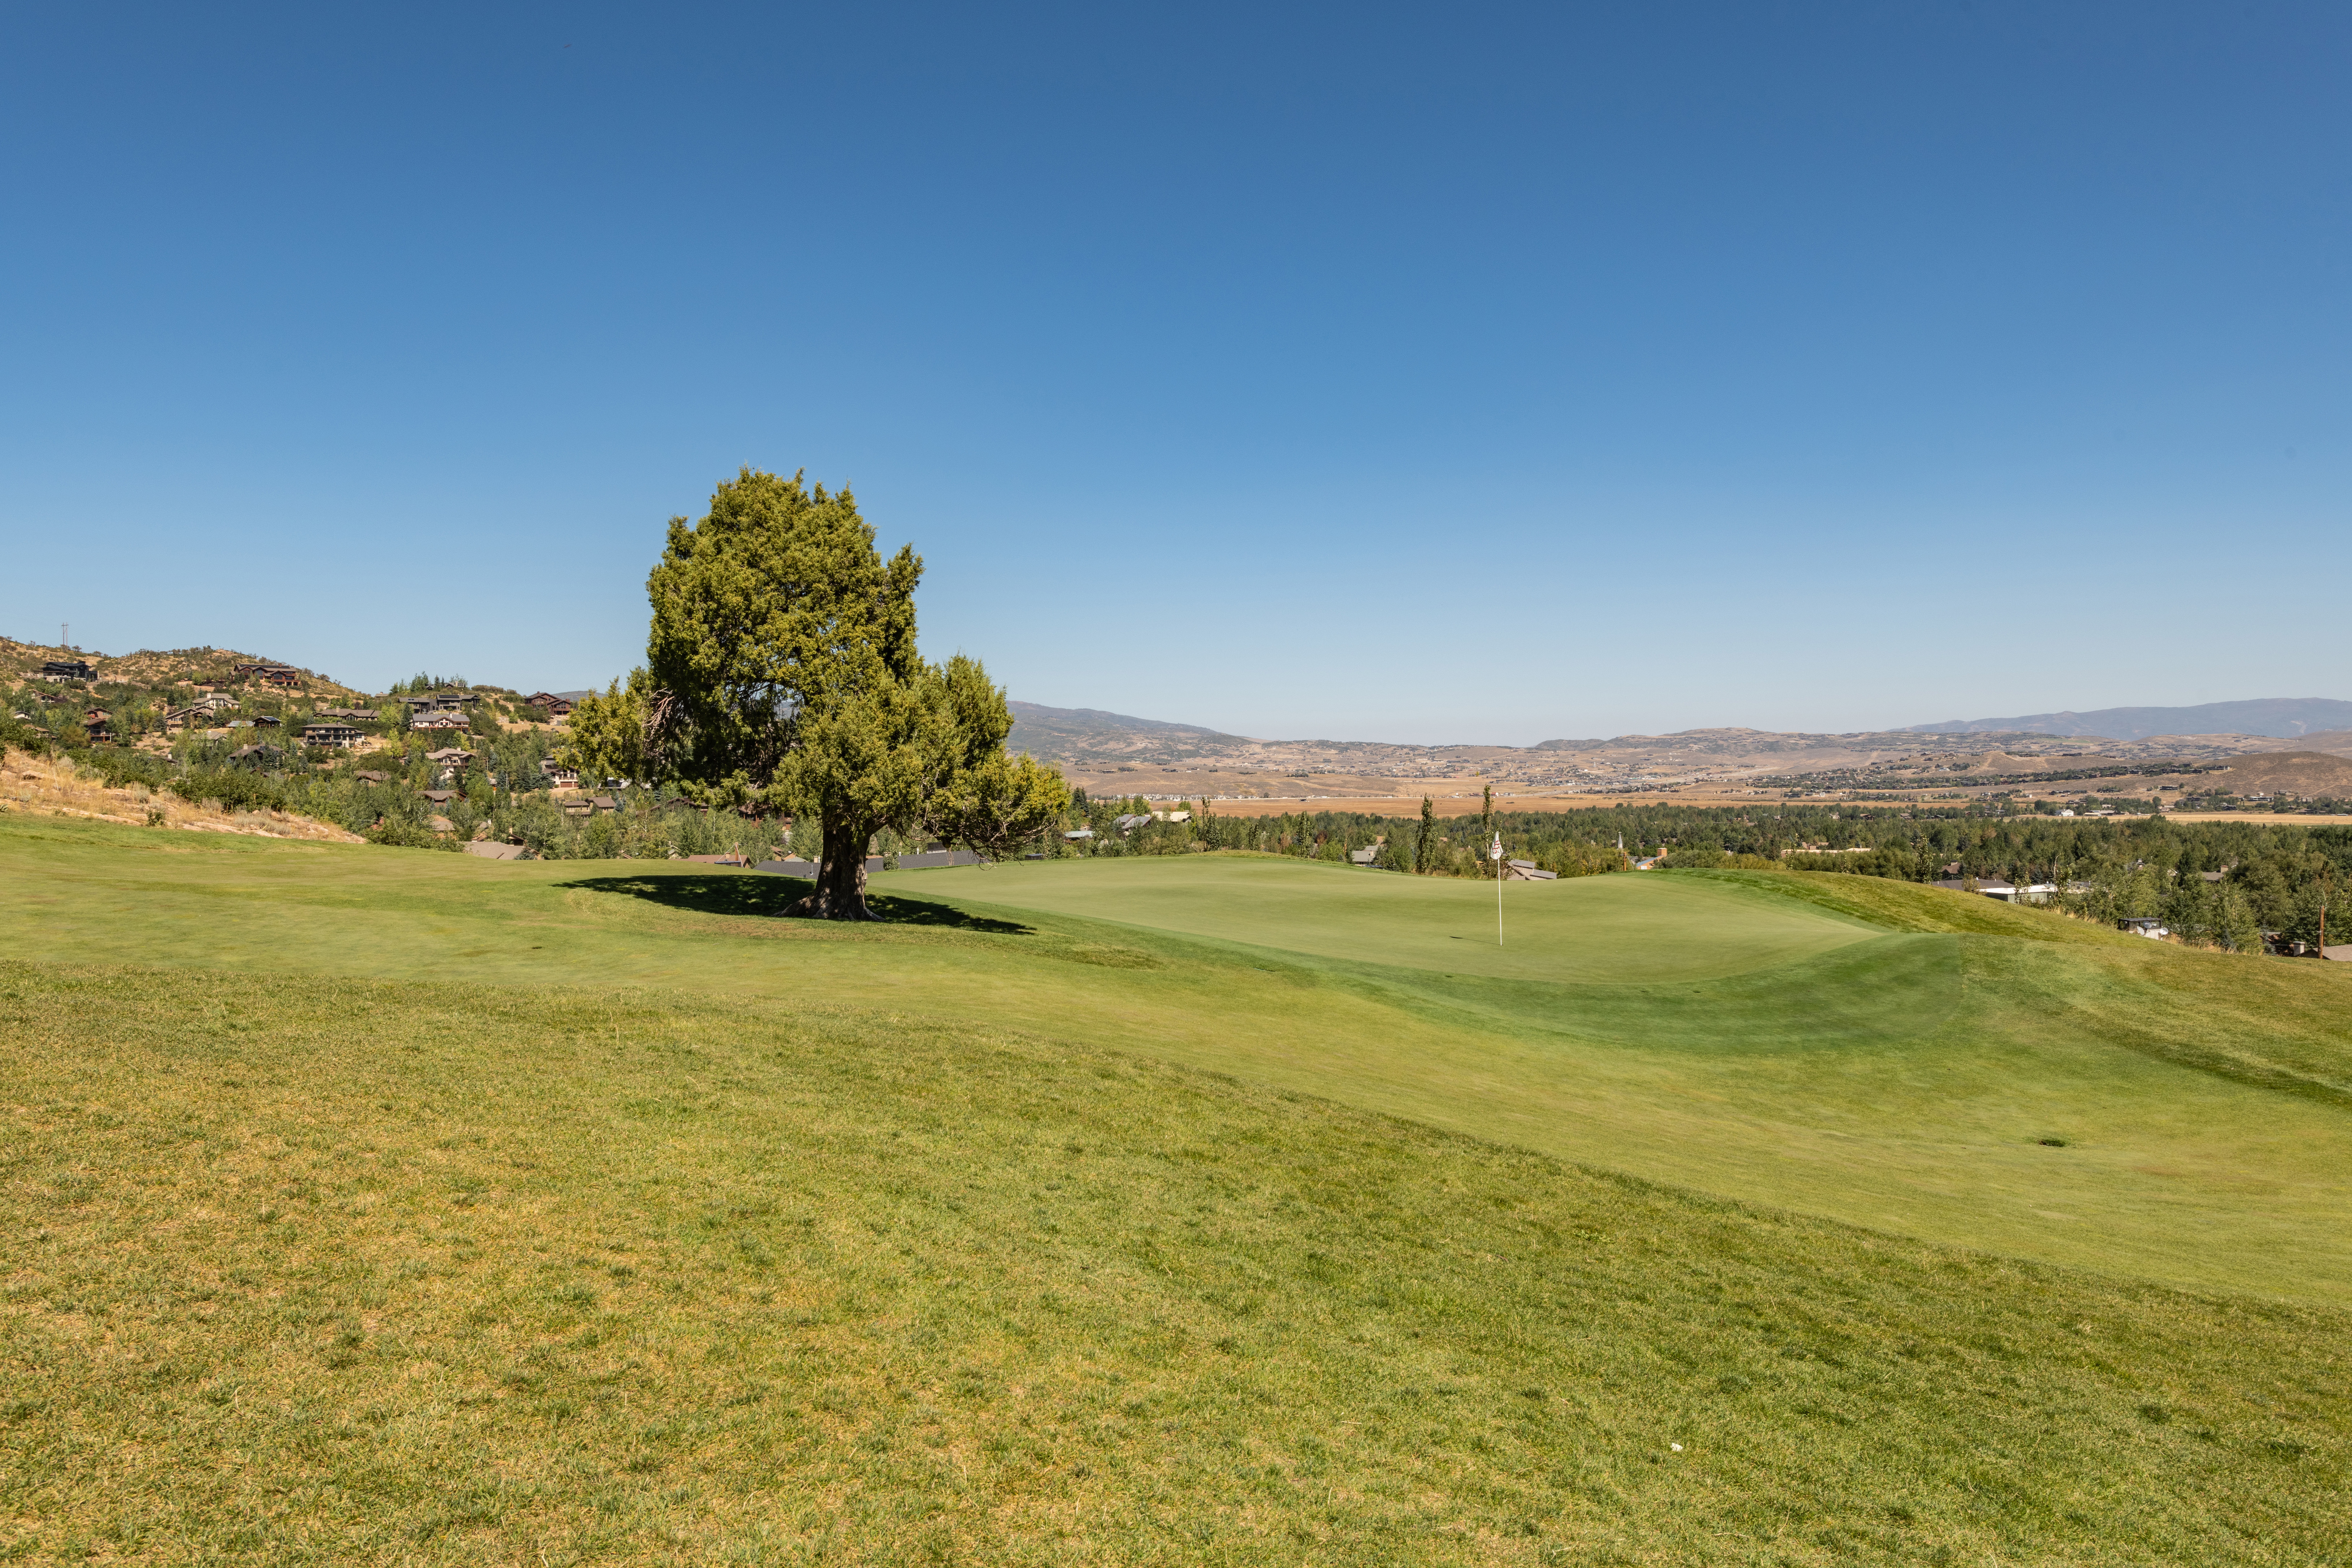 Enjoy this view of valley, golf, and the namesake Juniper tree